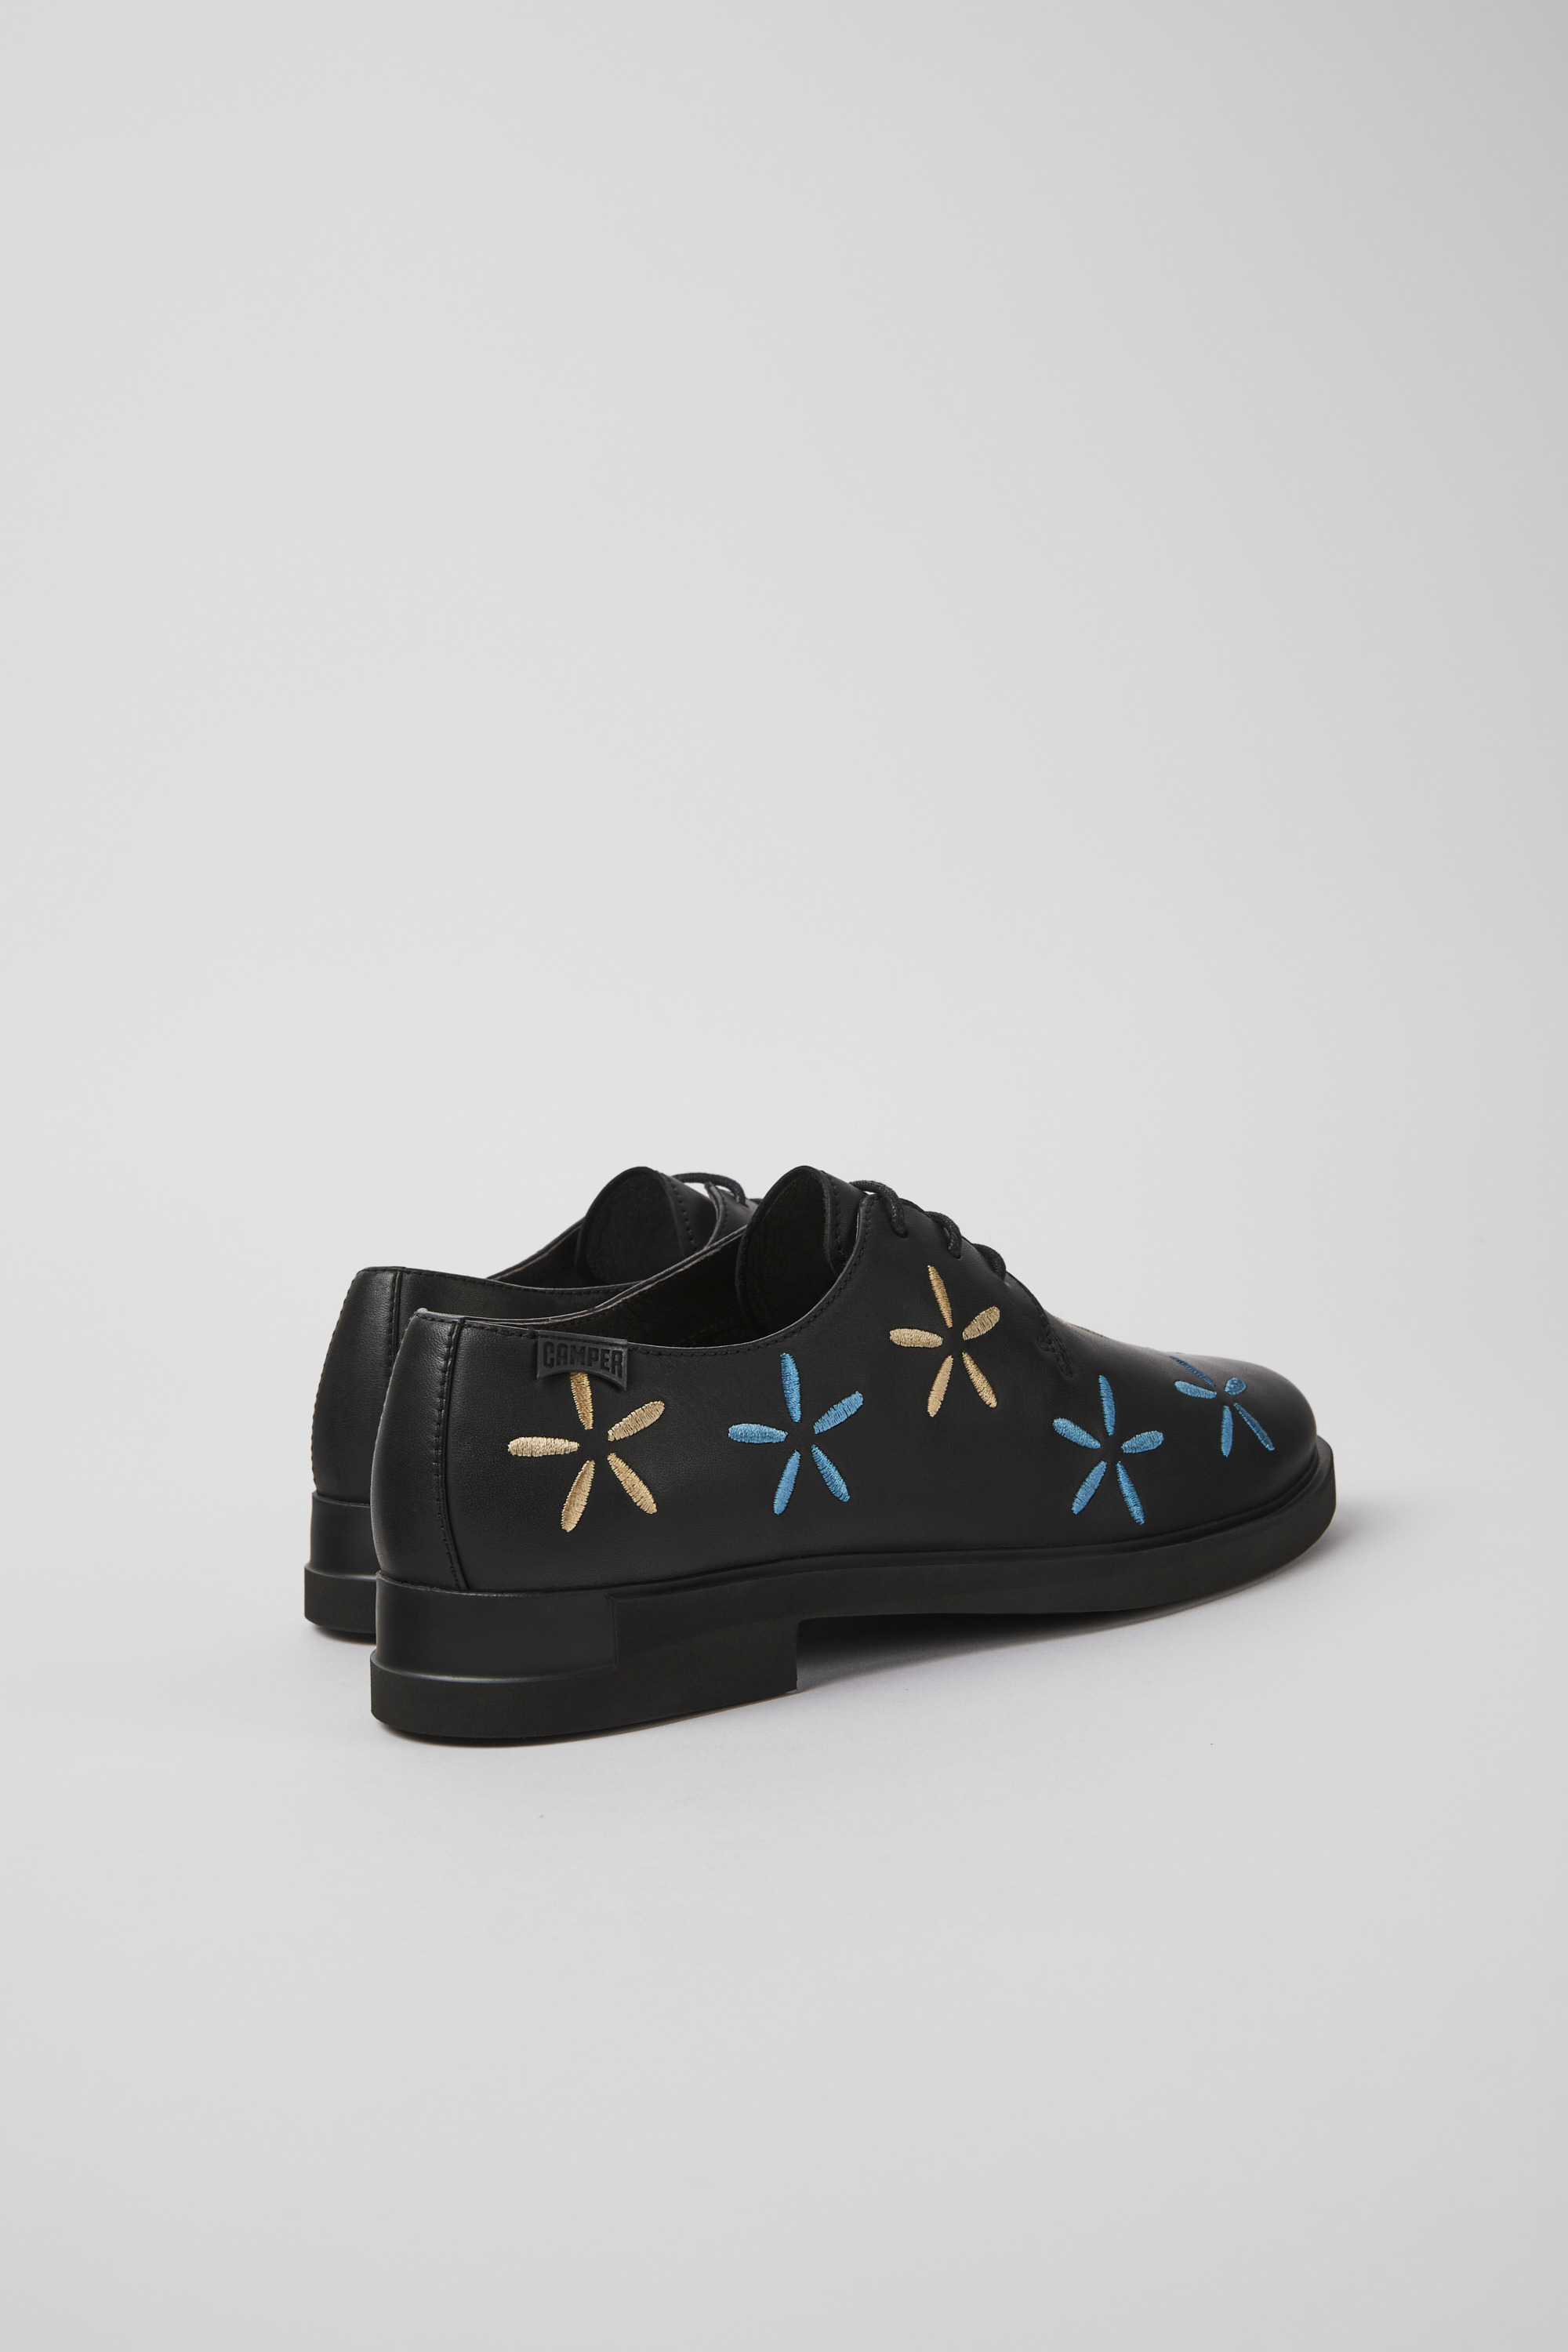 Twins Black Formal Shoes for Women - Spring/Summer collection 